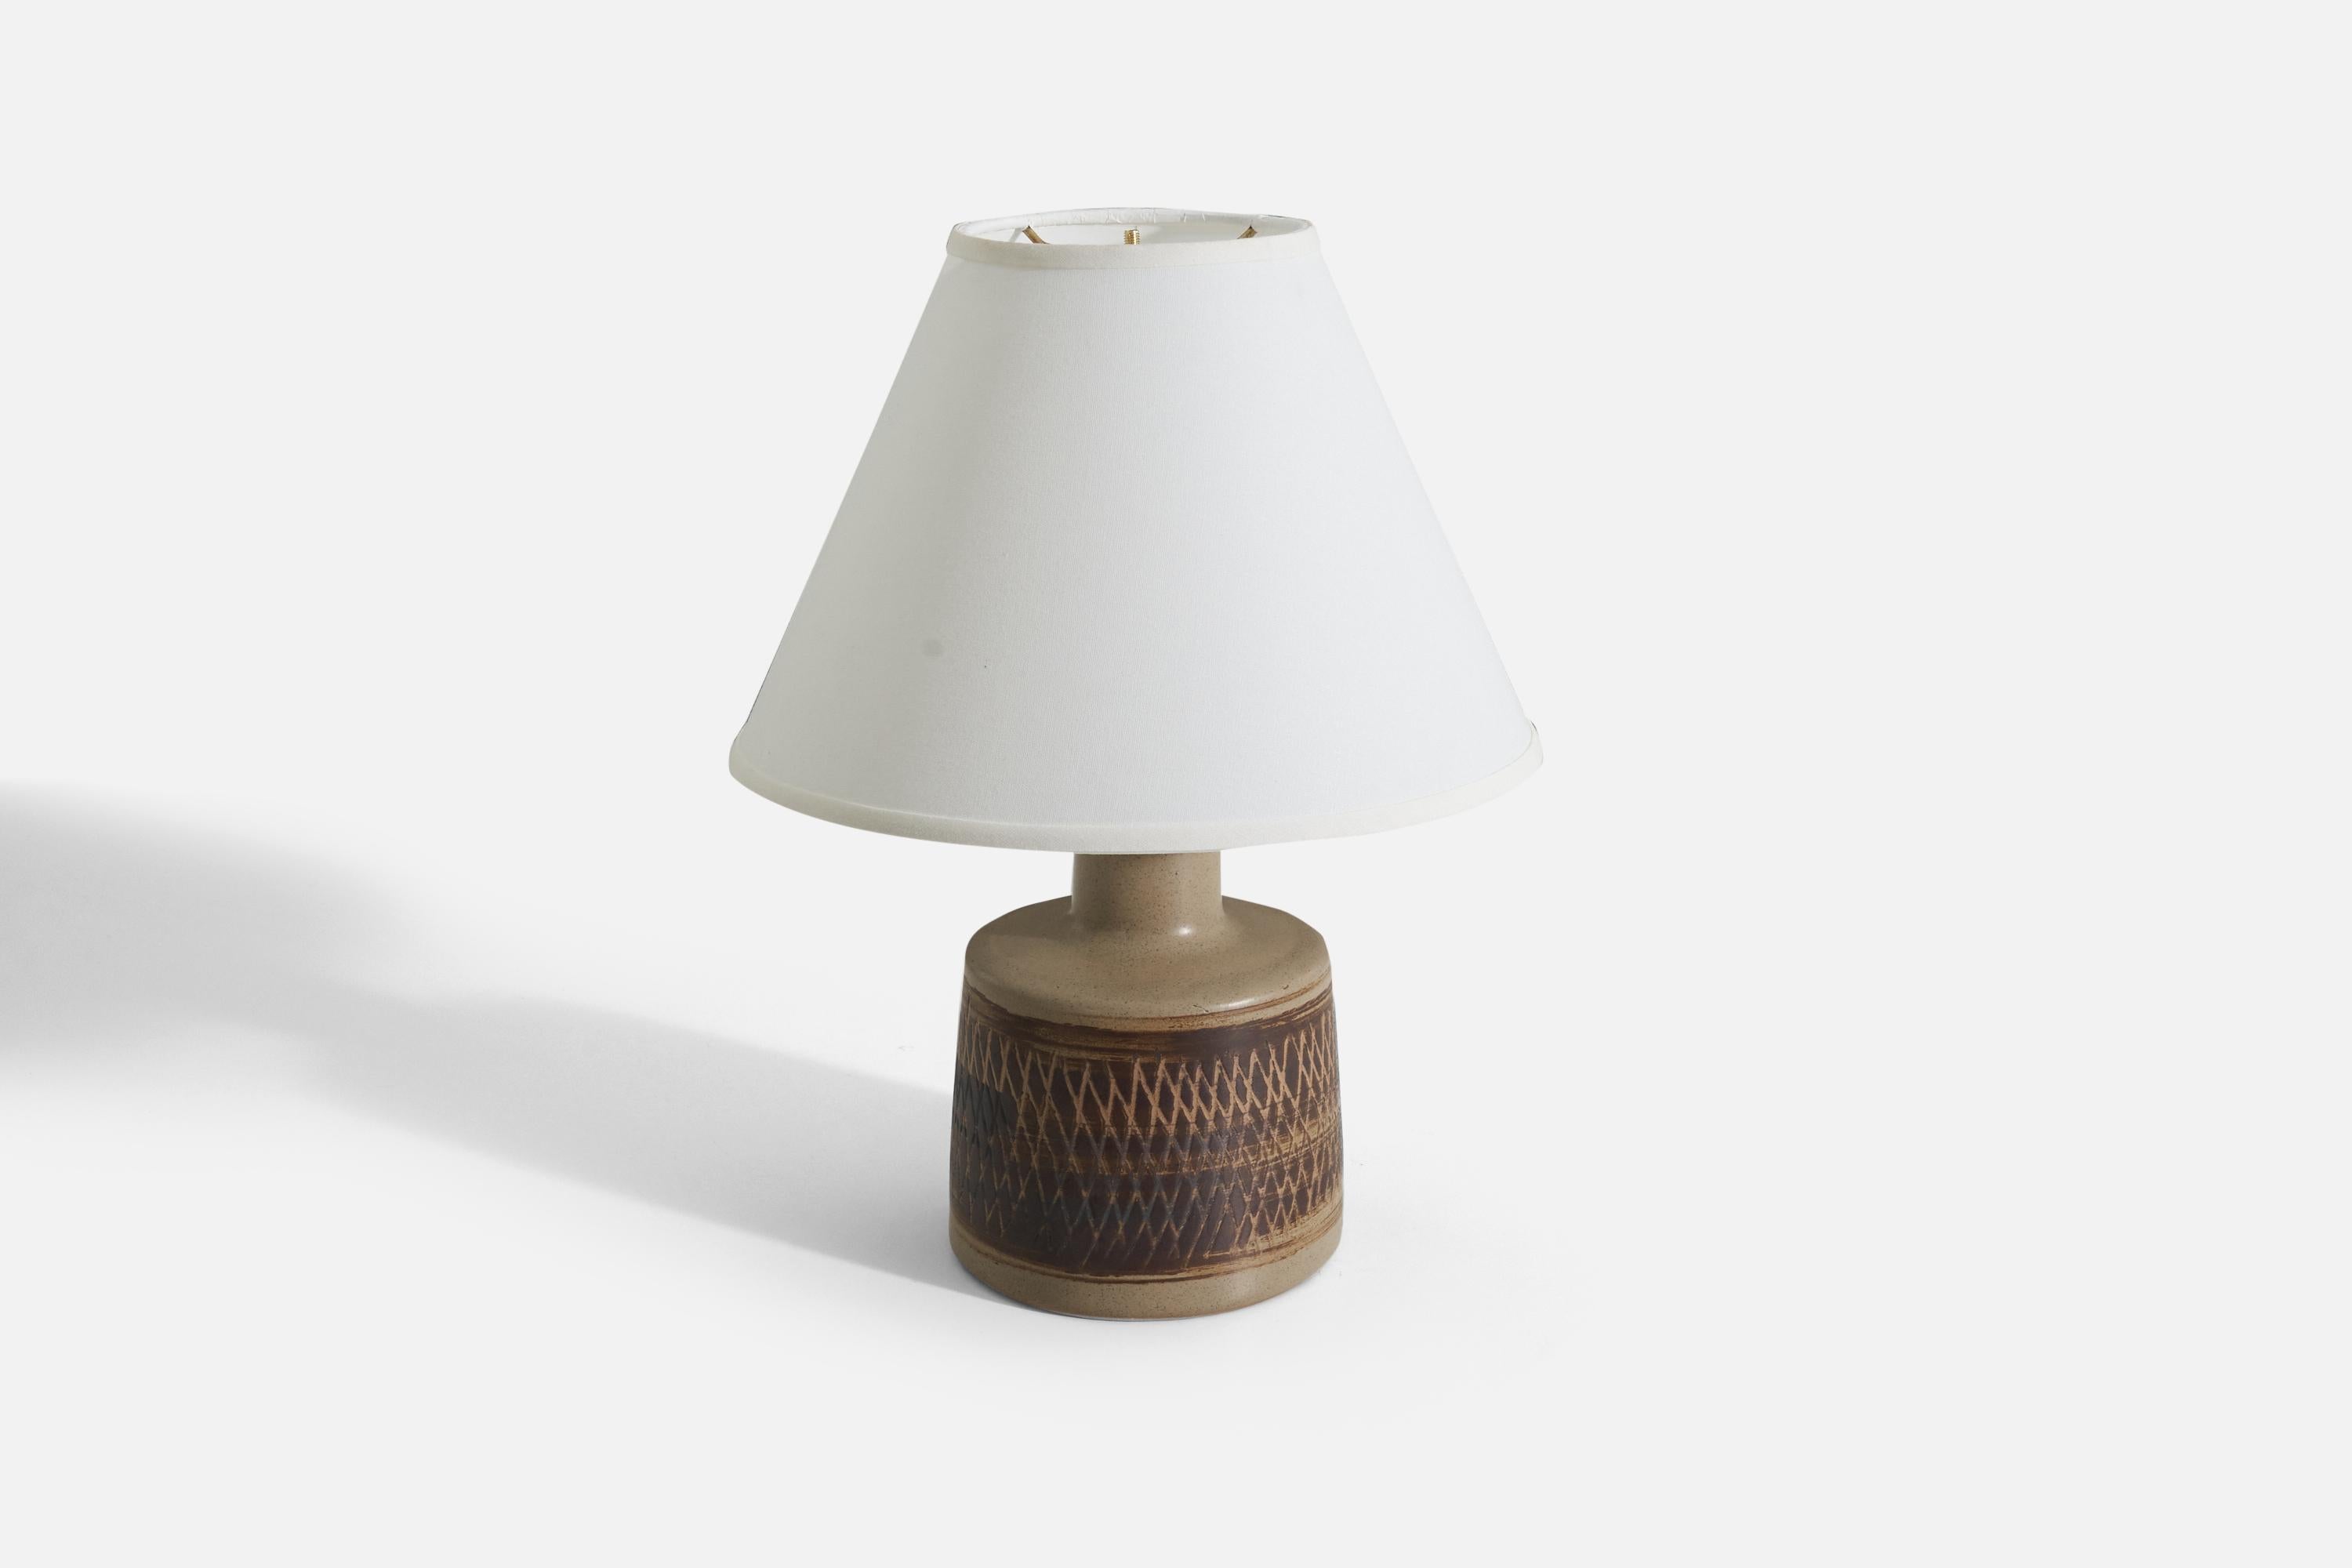 Jane & Gordon Martz, Table Lamp, Ceramic, Walnut, Marshall Studios, 1960s In Good Condition For Sale In High Point, NC